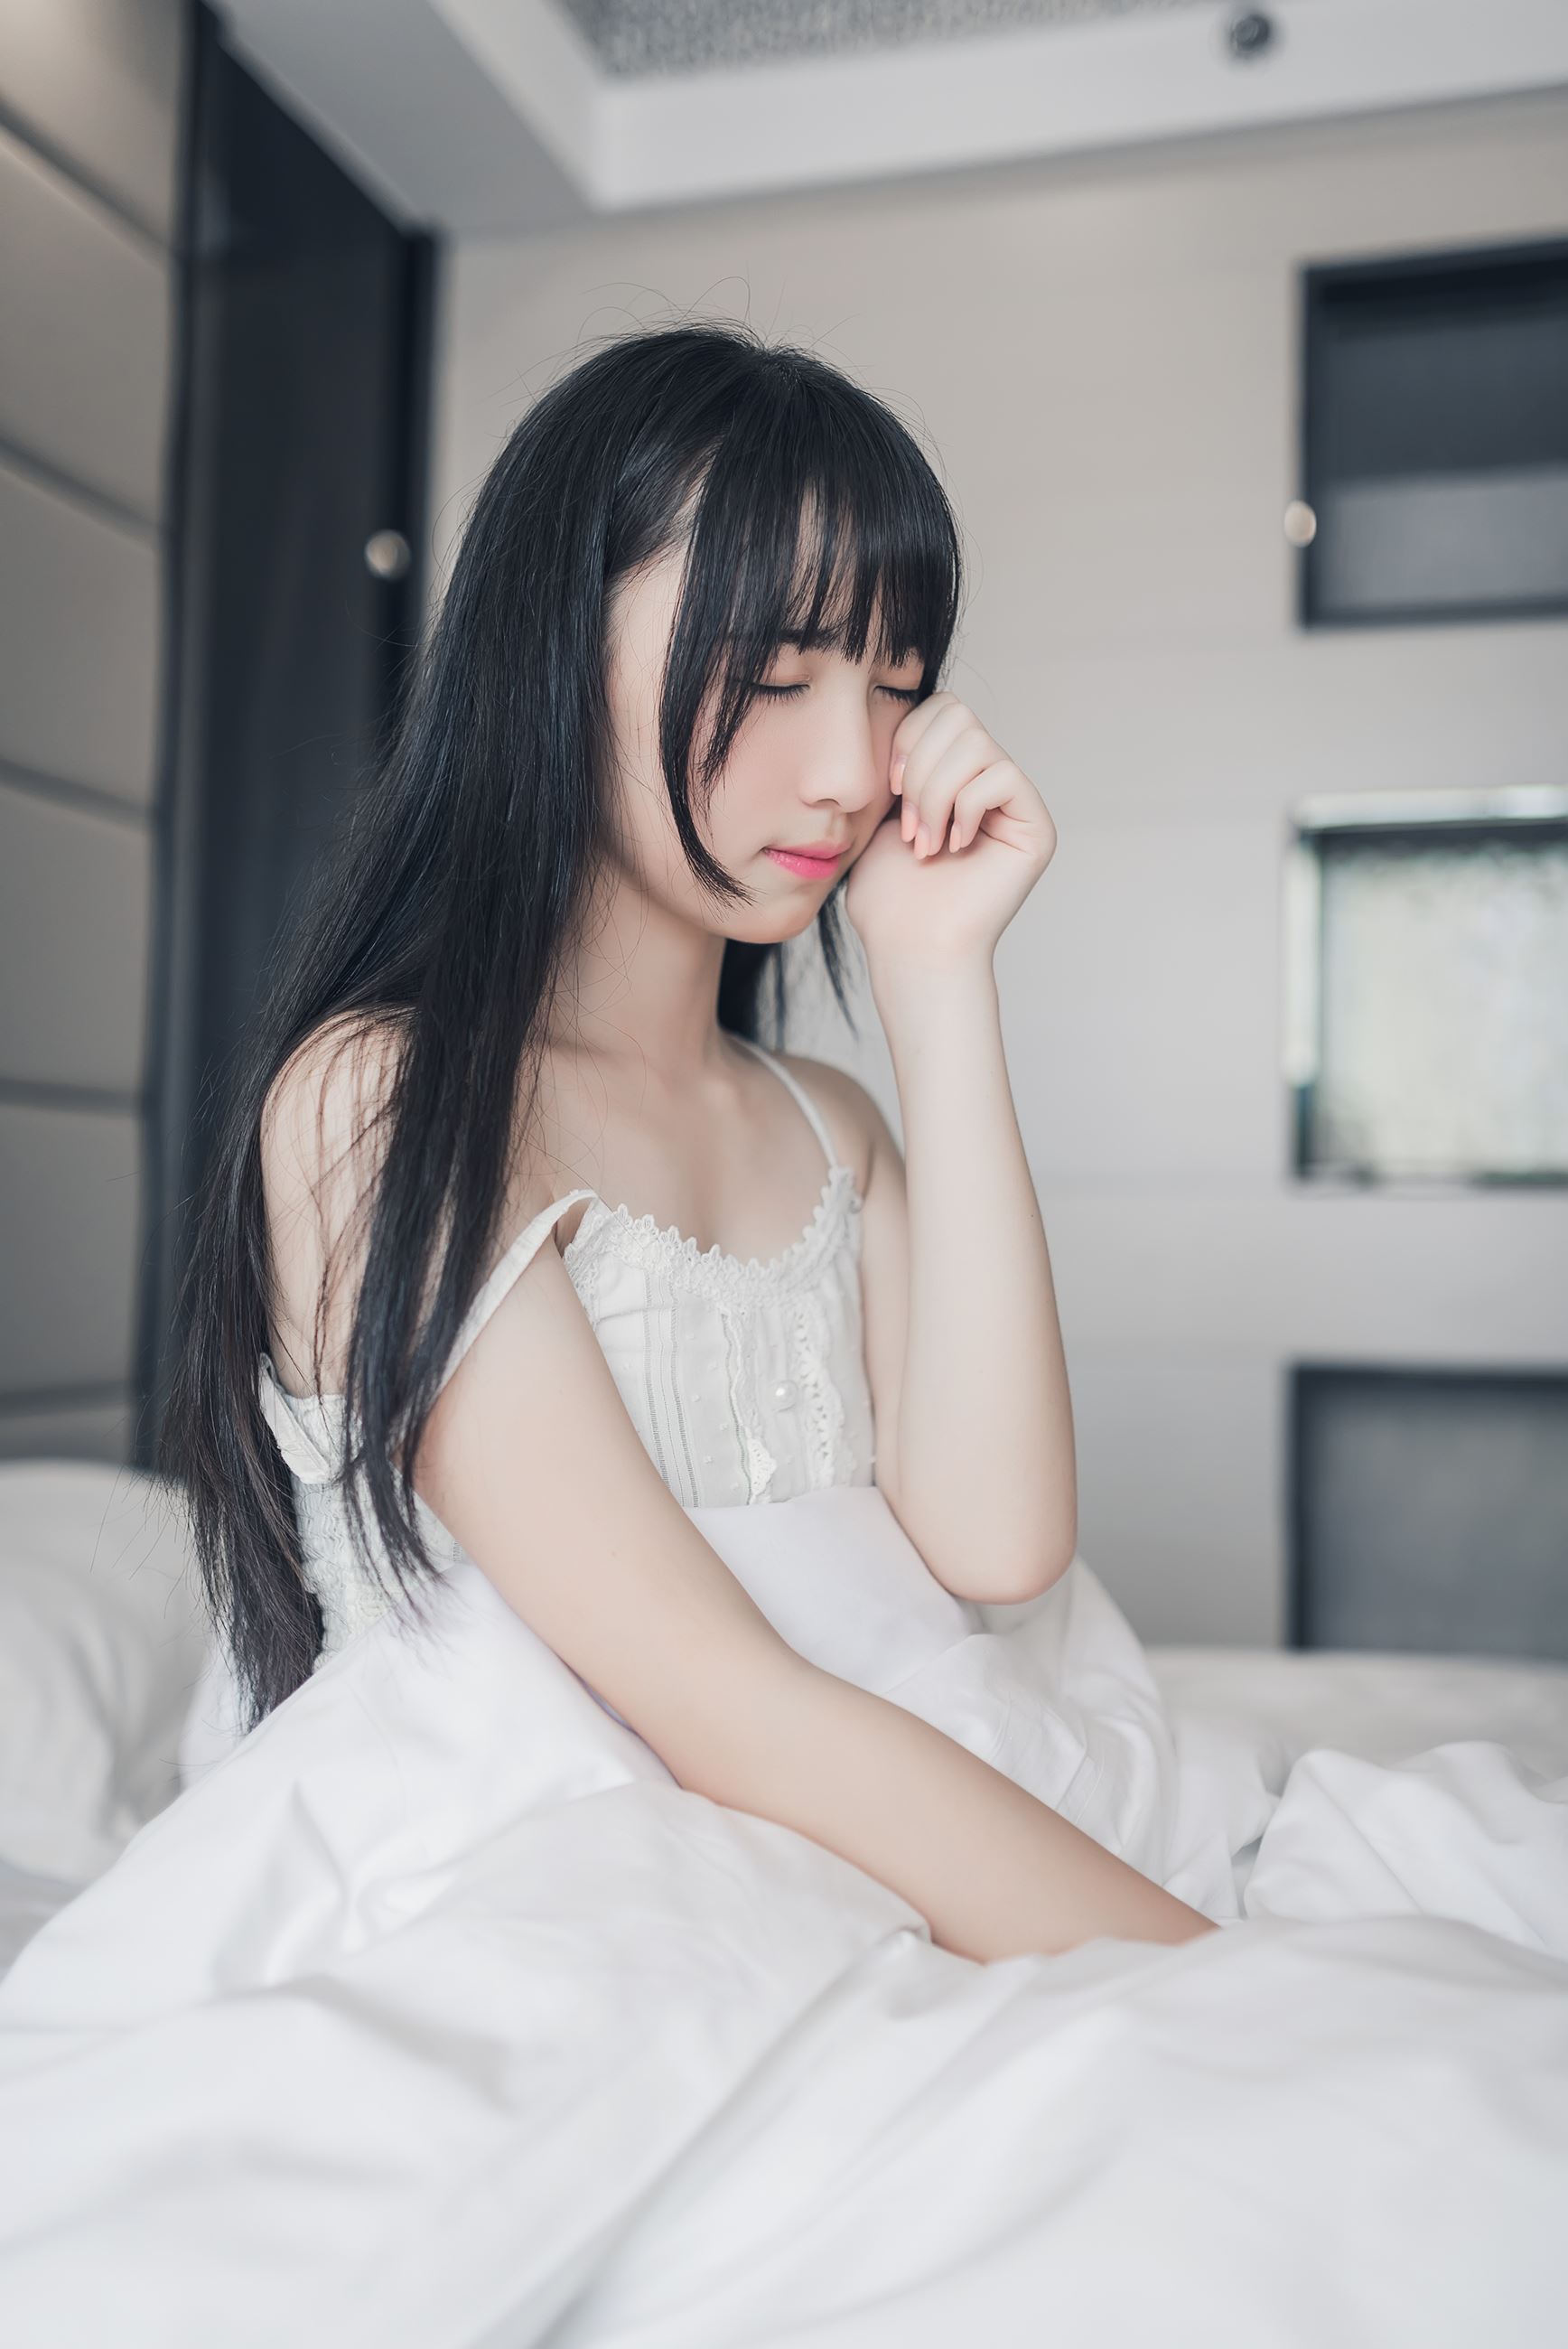 Meow sugar reflects the innocent smile of vol.006